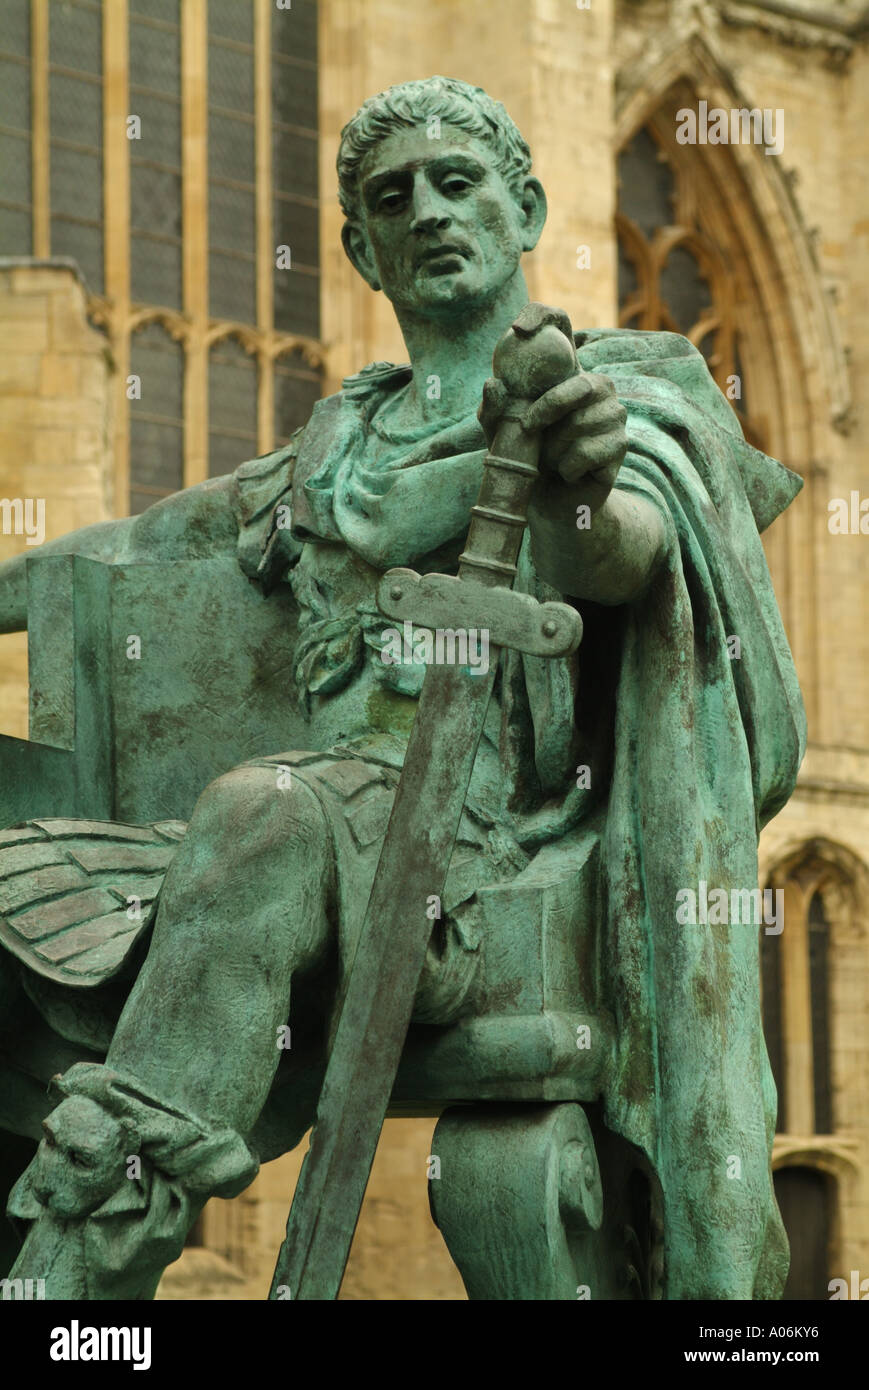 Bronze statue of the Roman Emperor Constantine the Great outside York Minster, Minster Yard, York, England, UK Stock Photo